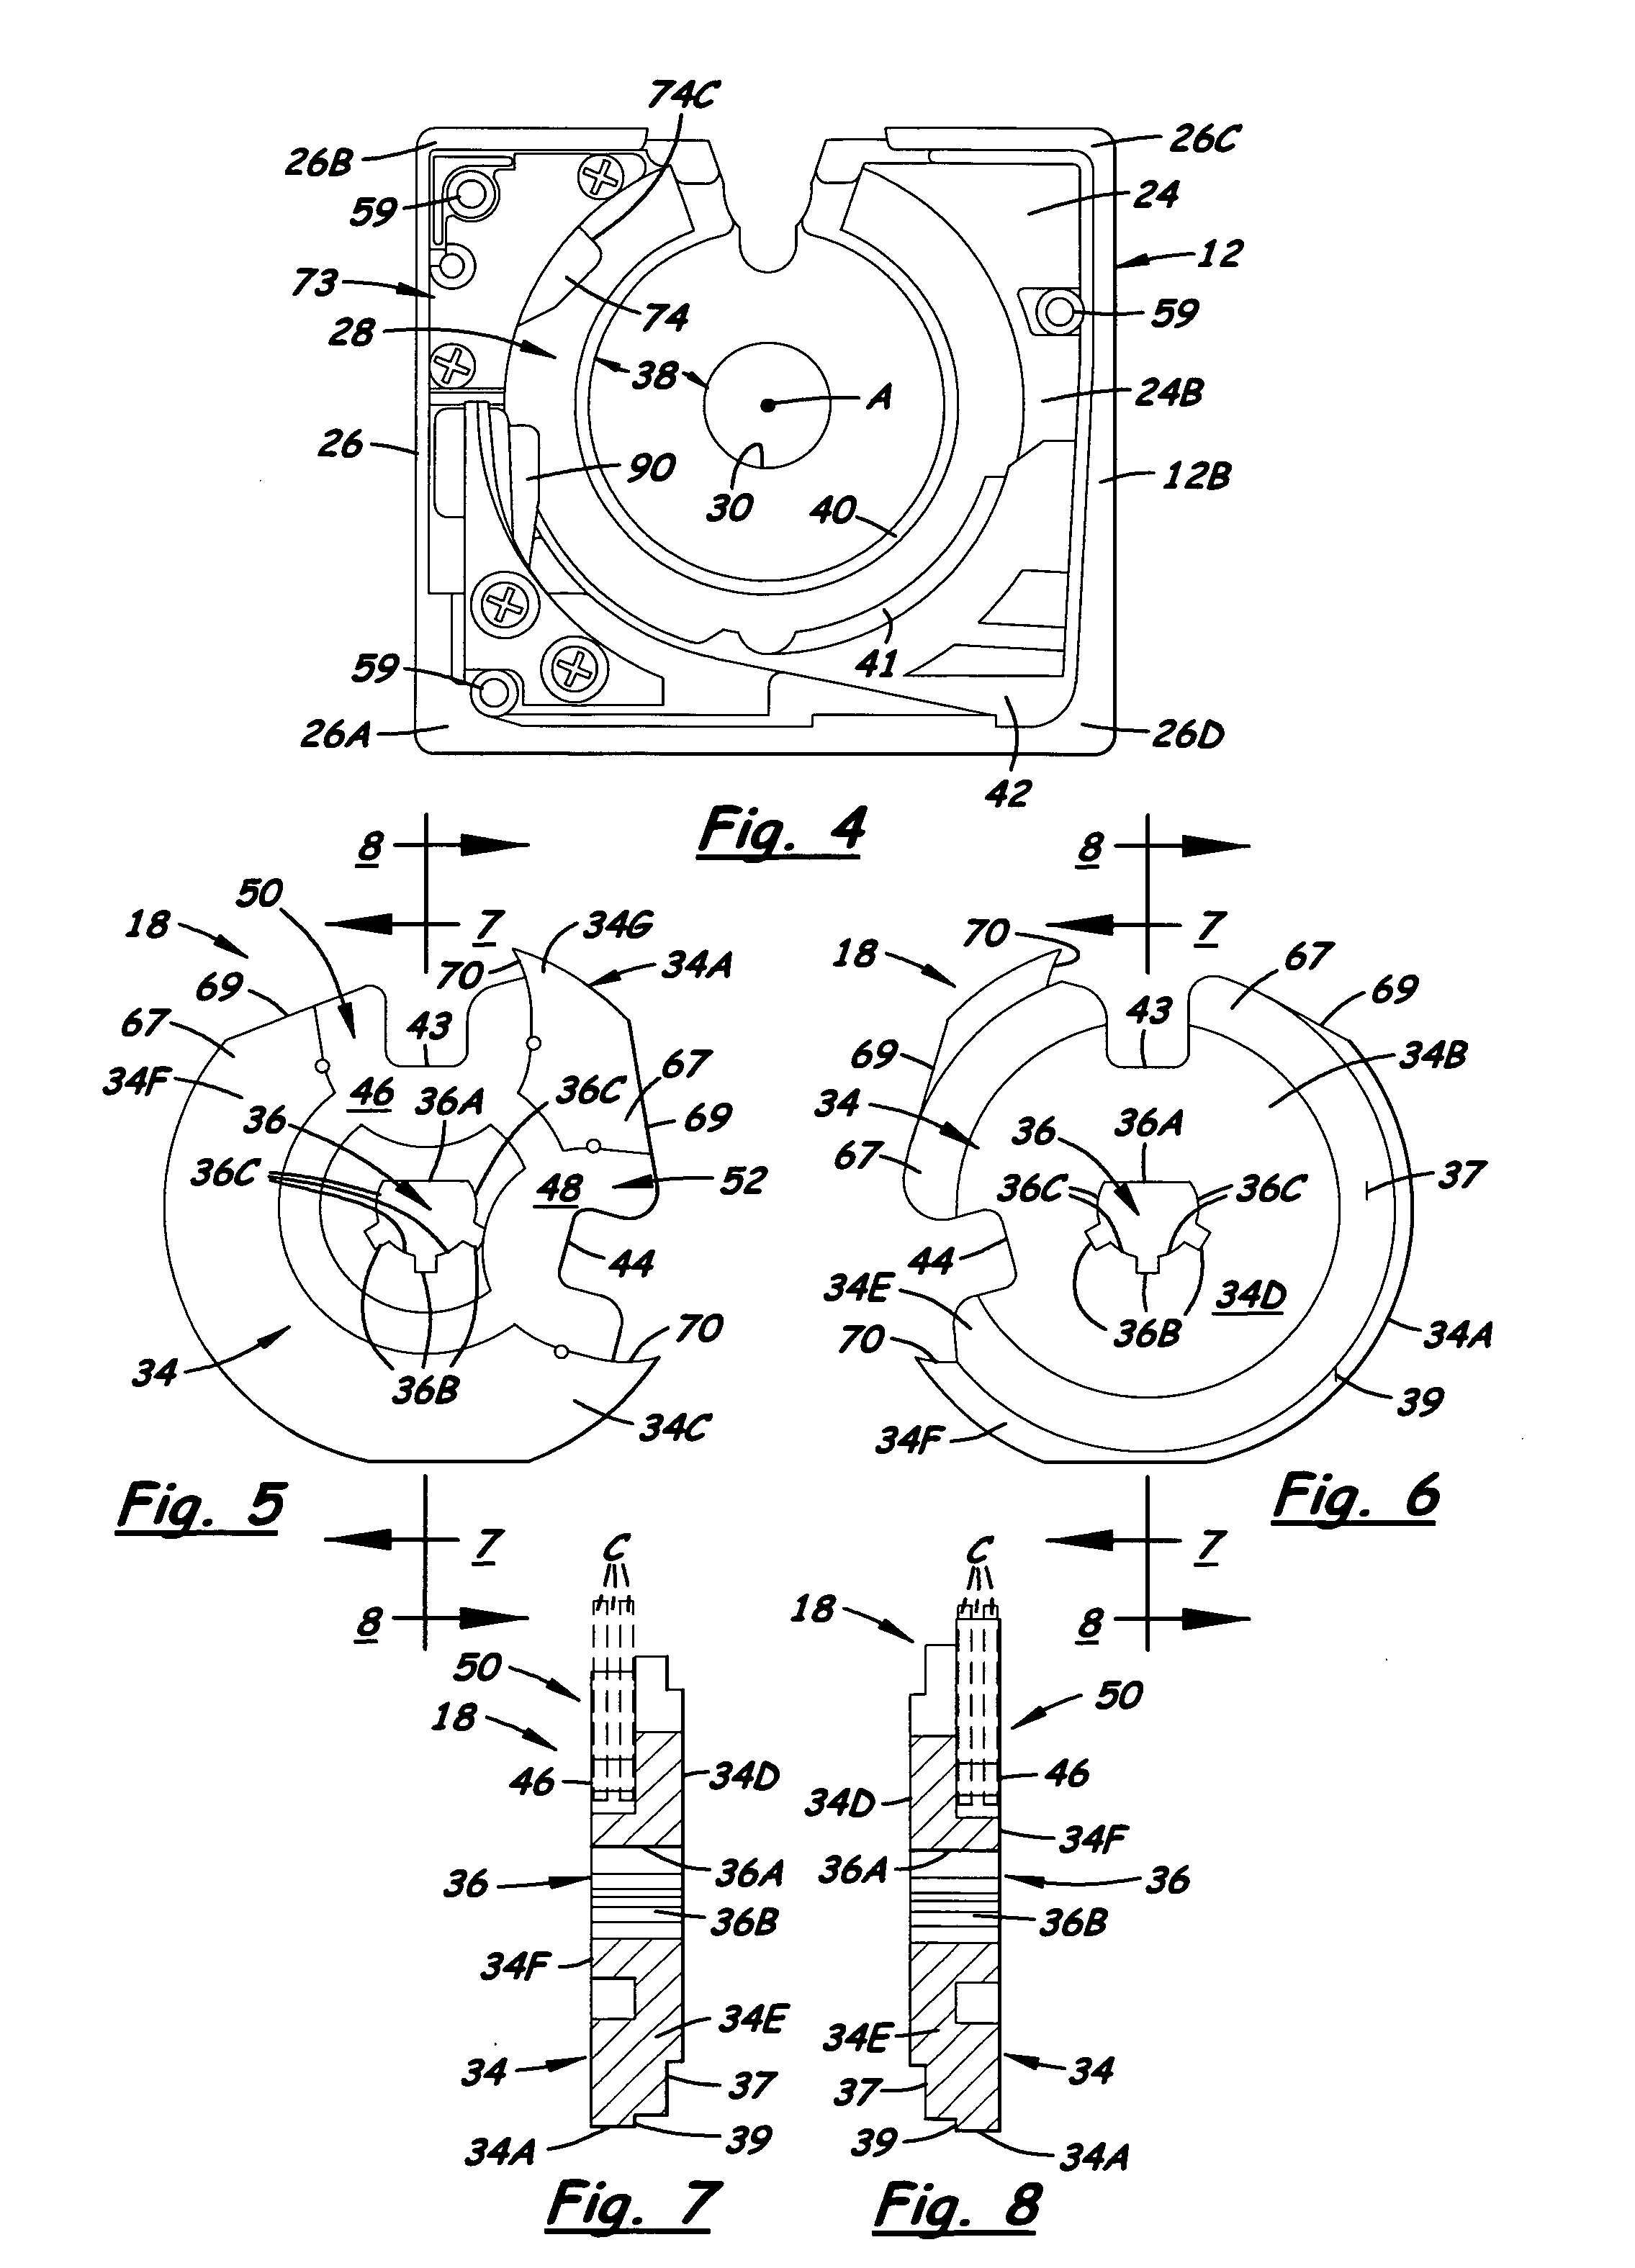 Multi-coin operated actuation mechanism